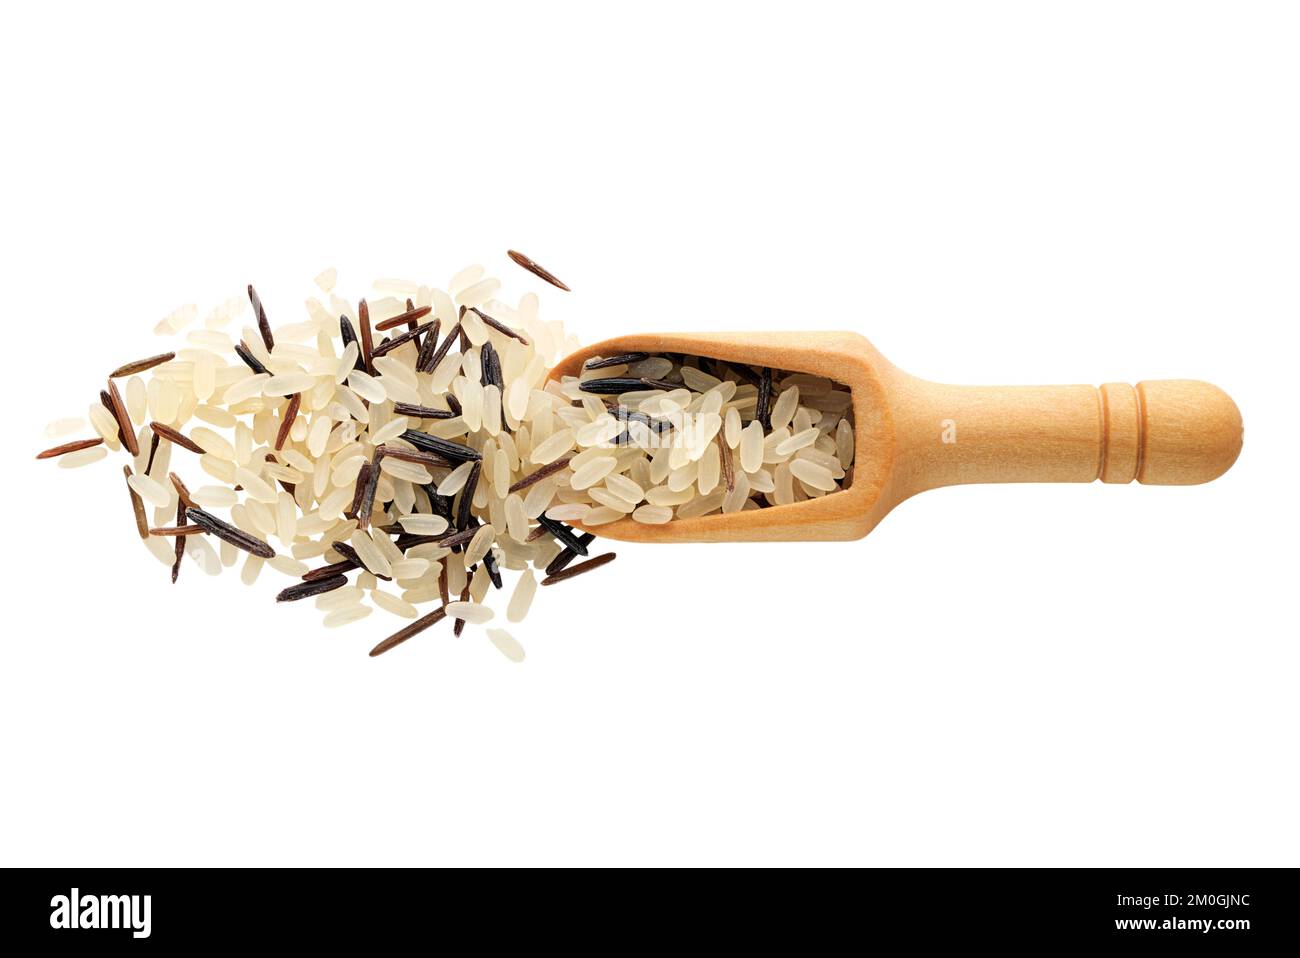 Food ingredients: mix of uncooked white and wild rice in a wooden scoop, isolated on white background Stock Photo